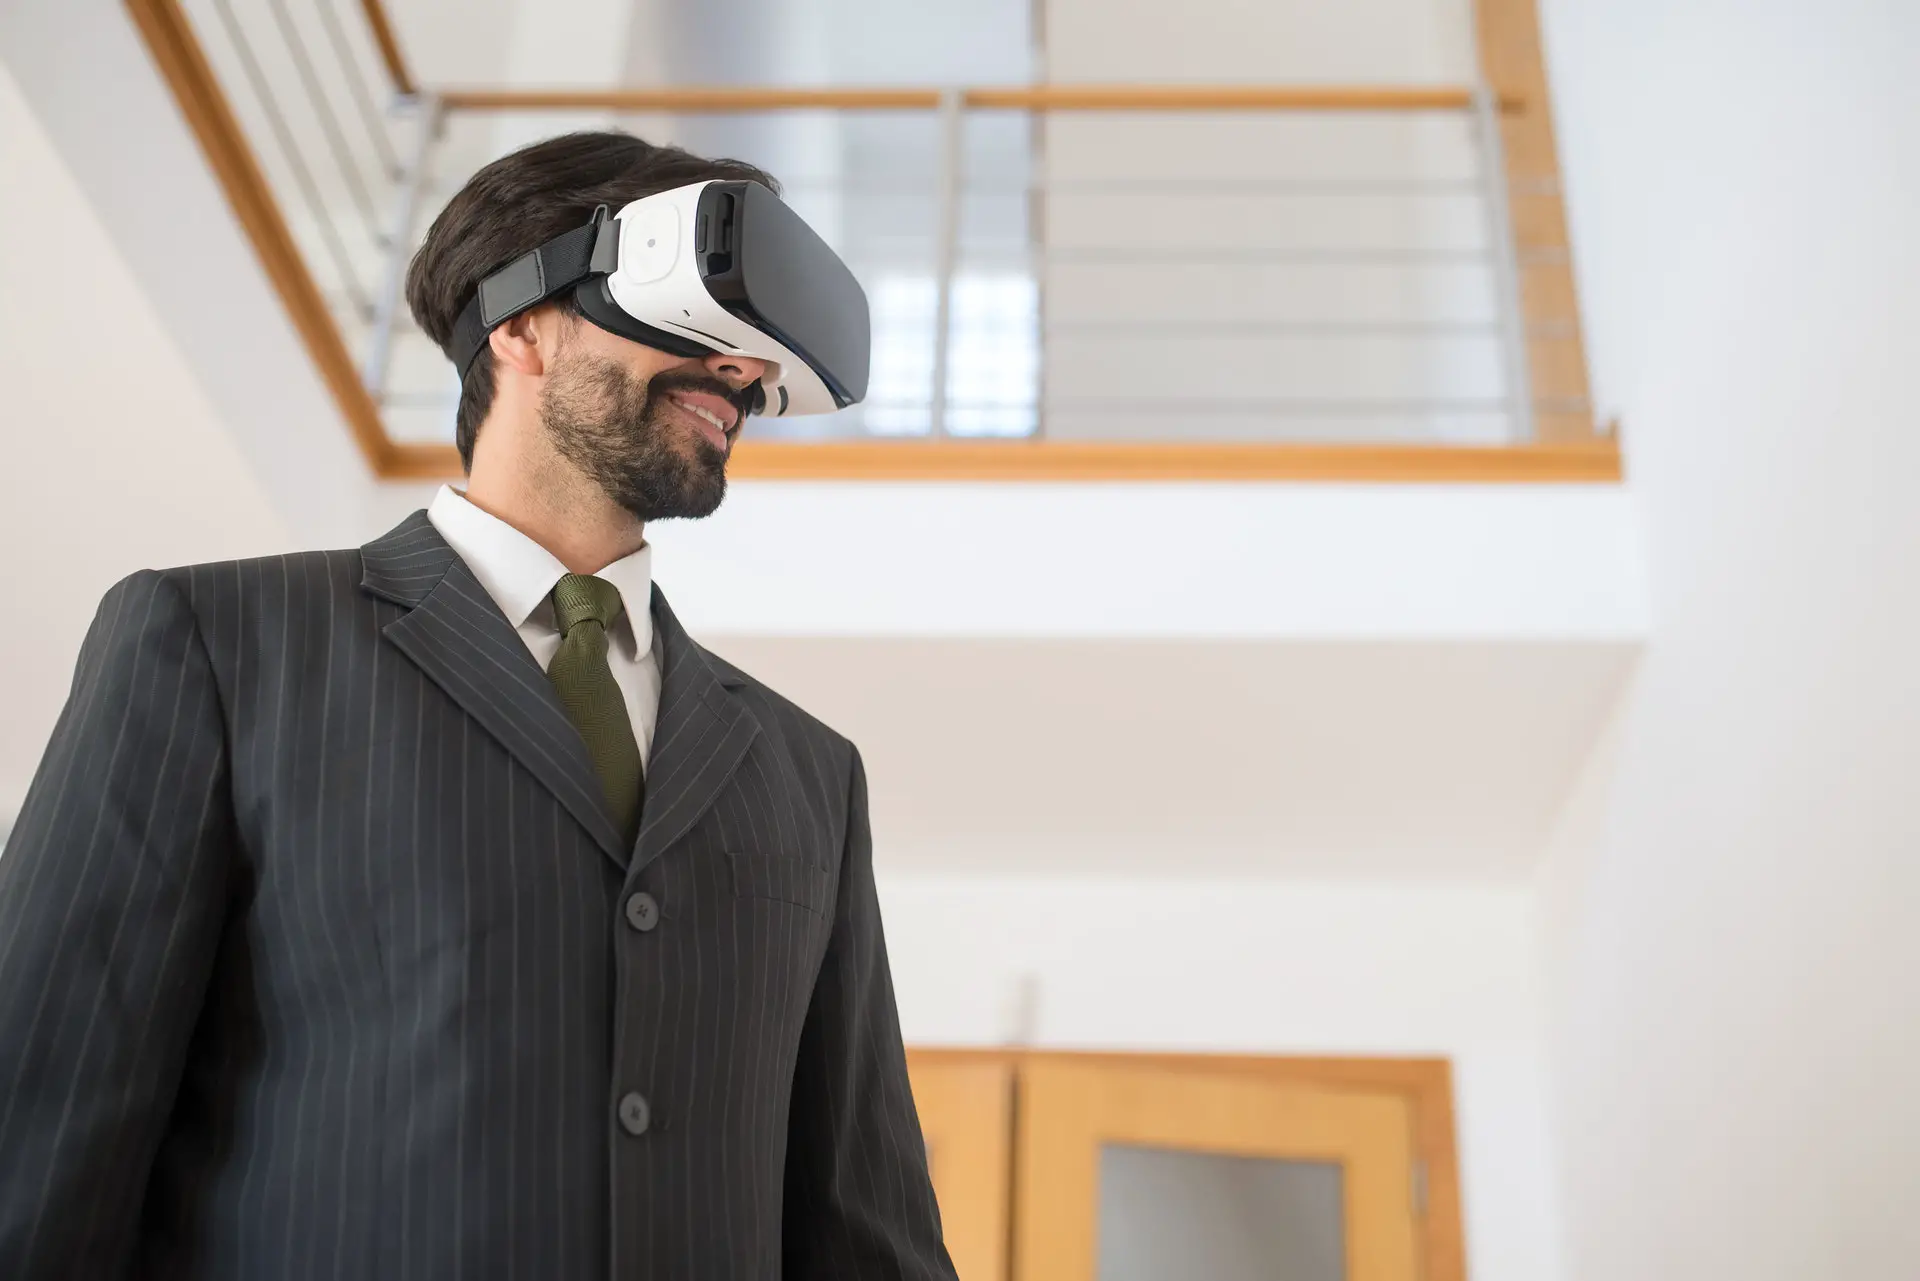 JBHXR and Serious Labs Partner to Facilitate Virtual Reality Training for MEWPs